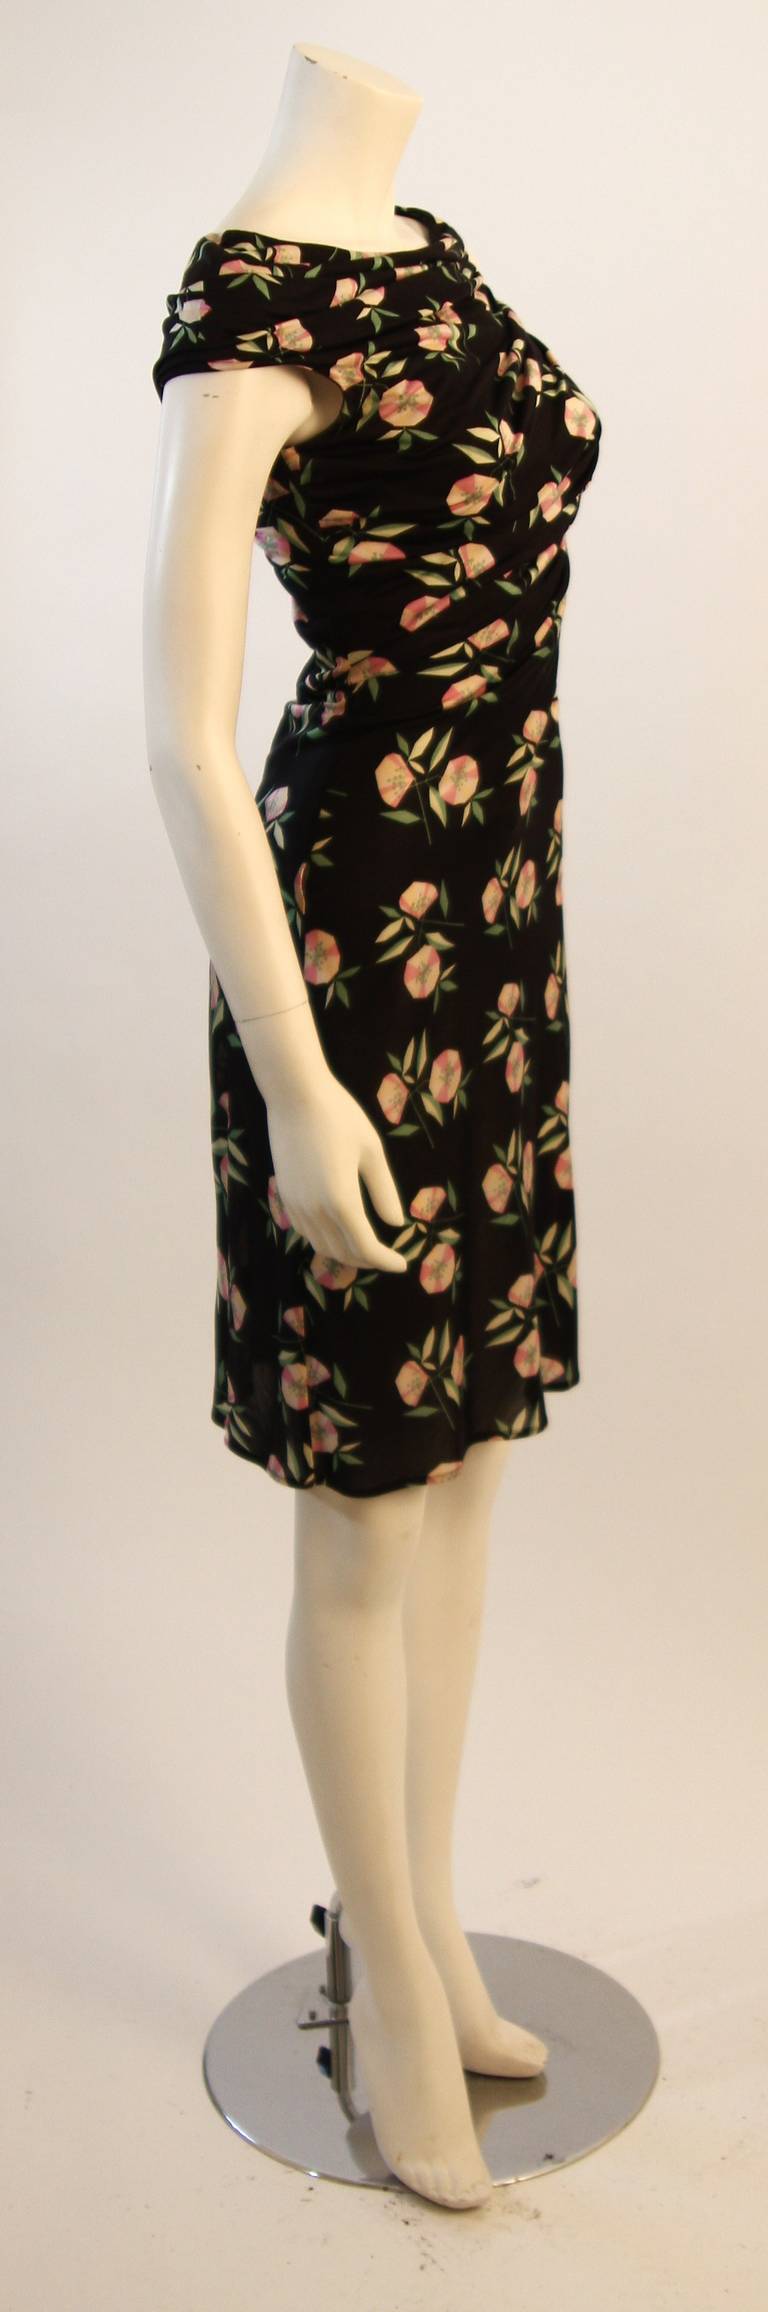 Women's Gianni Versace Black with Pink Roses Ruched Silk Jersey Dress Size 40 For Sale